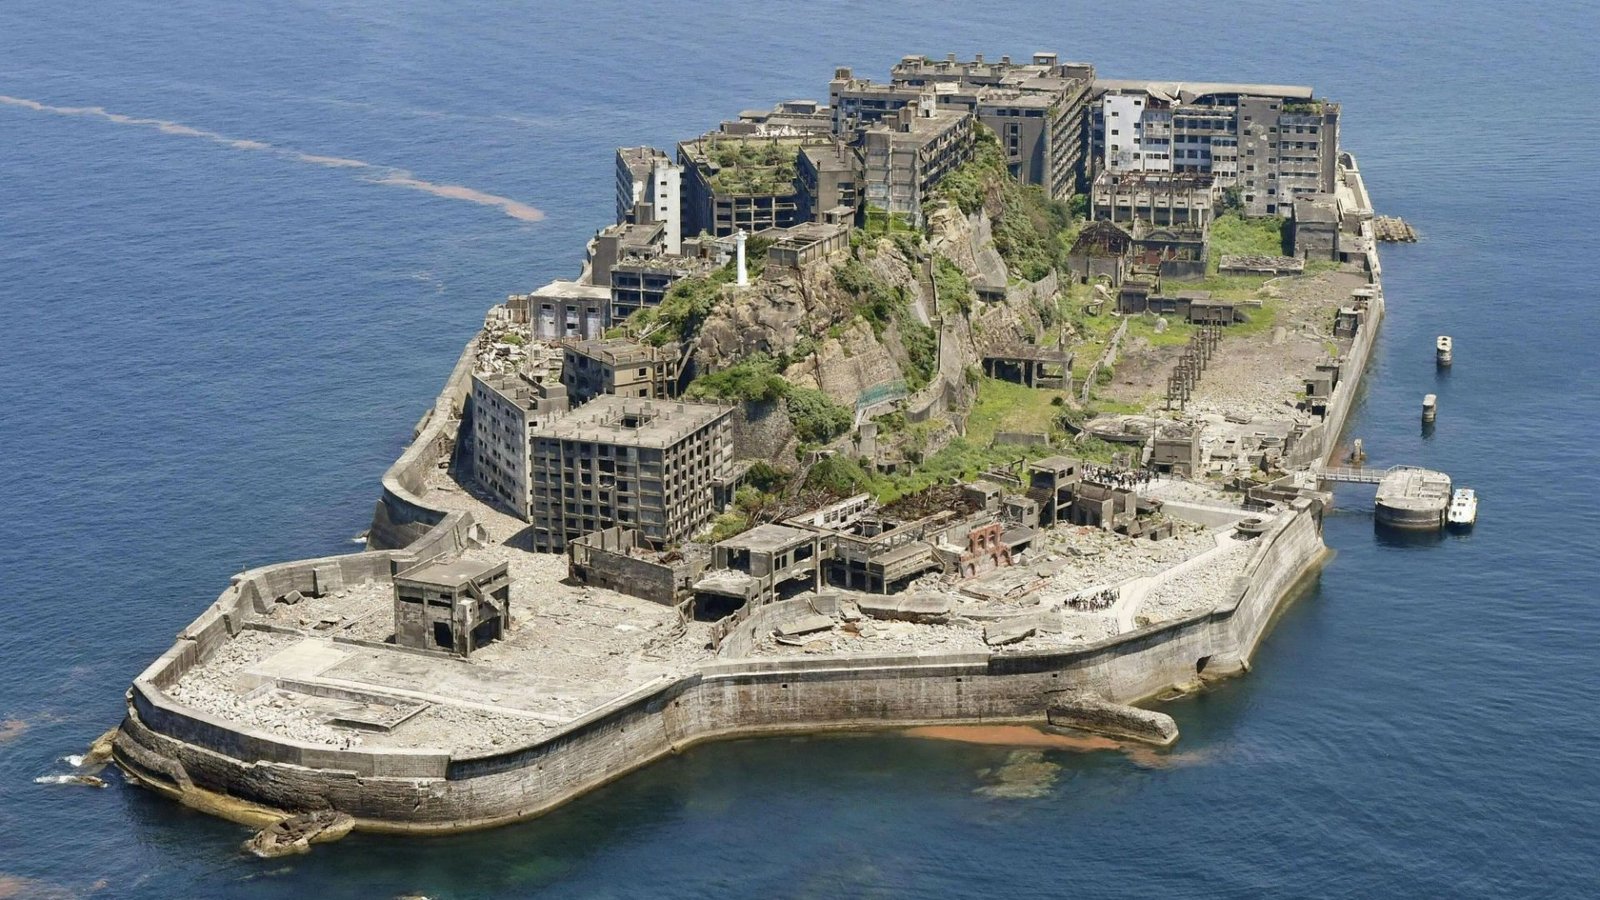 Spine chilling private island where entire city was built inside BATTLESHIP residents had 5ft of living space each